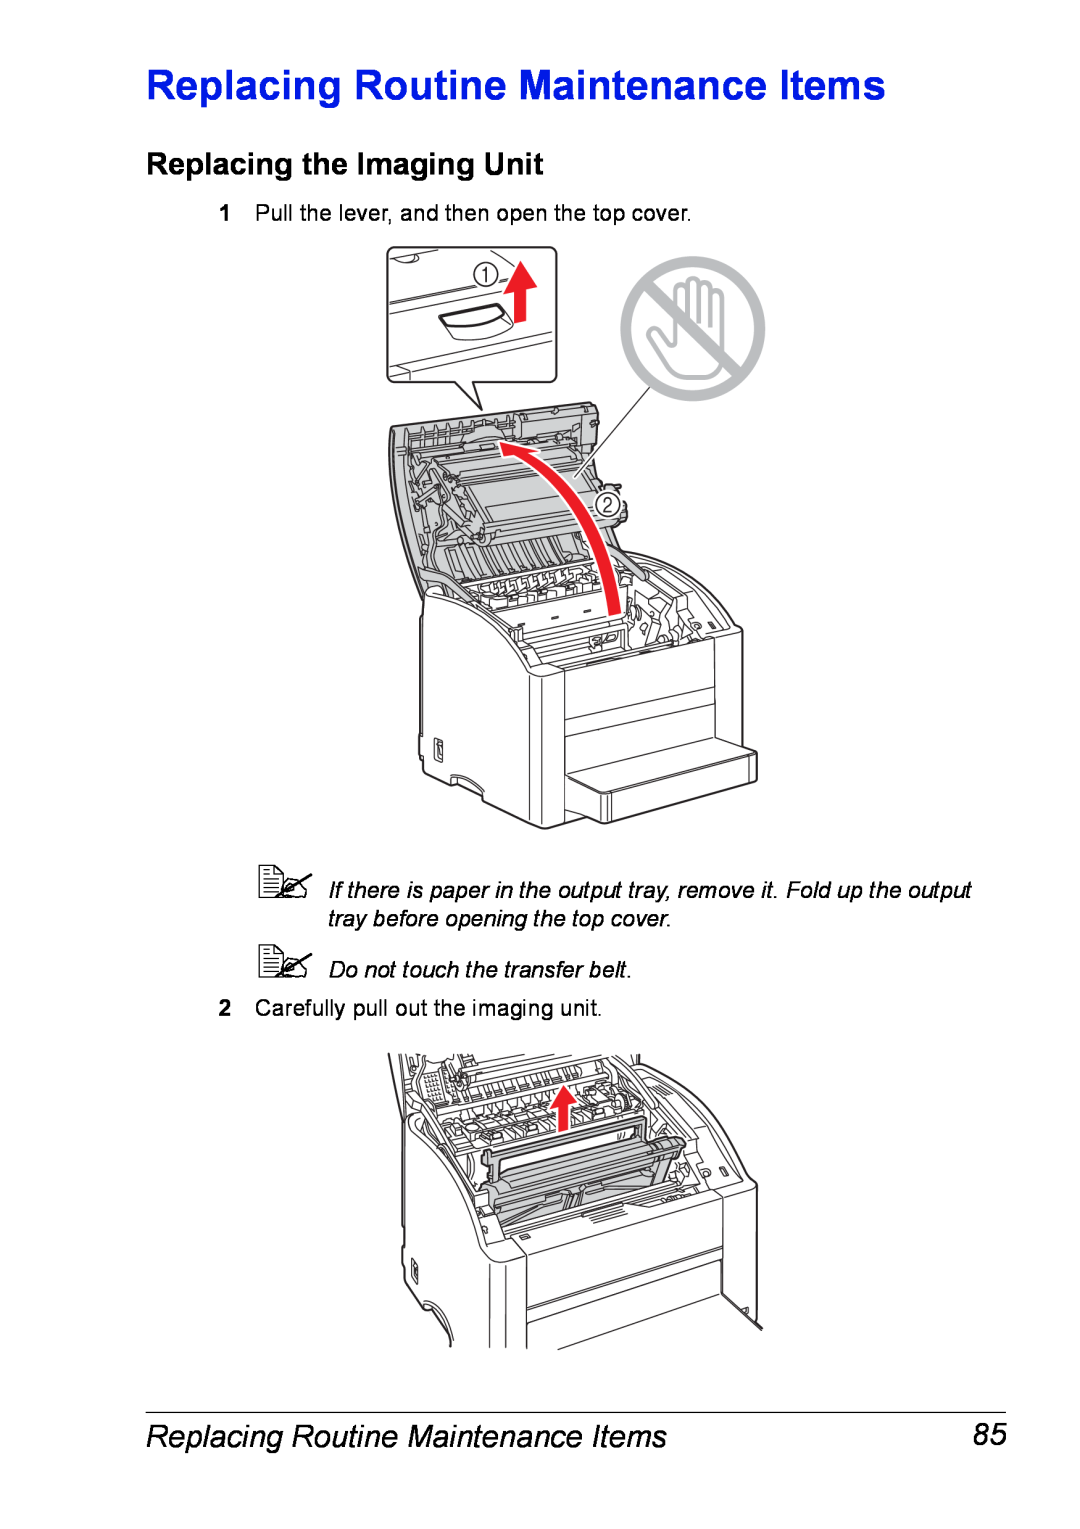 Xerox 6120 manual Replacing Routine Maintenance Items, Replacing the Imaging Unit,  Do not touch the transfer belt 